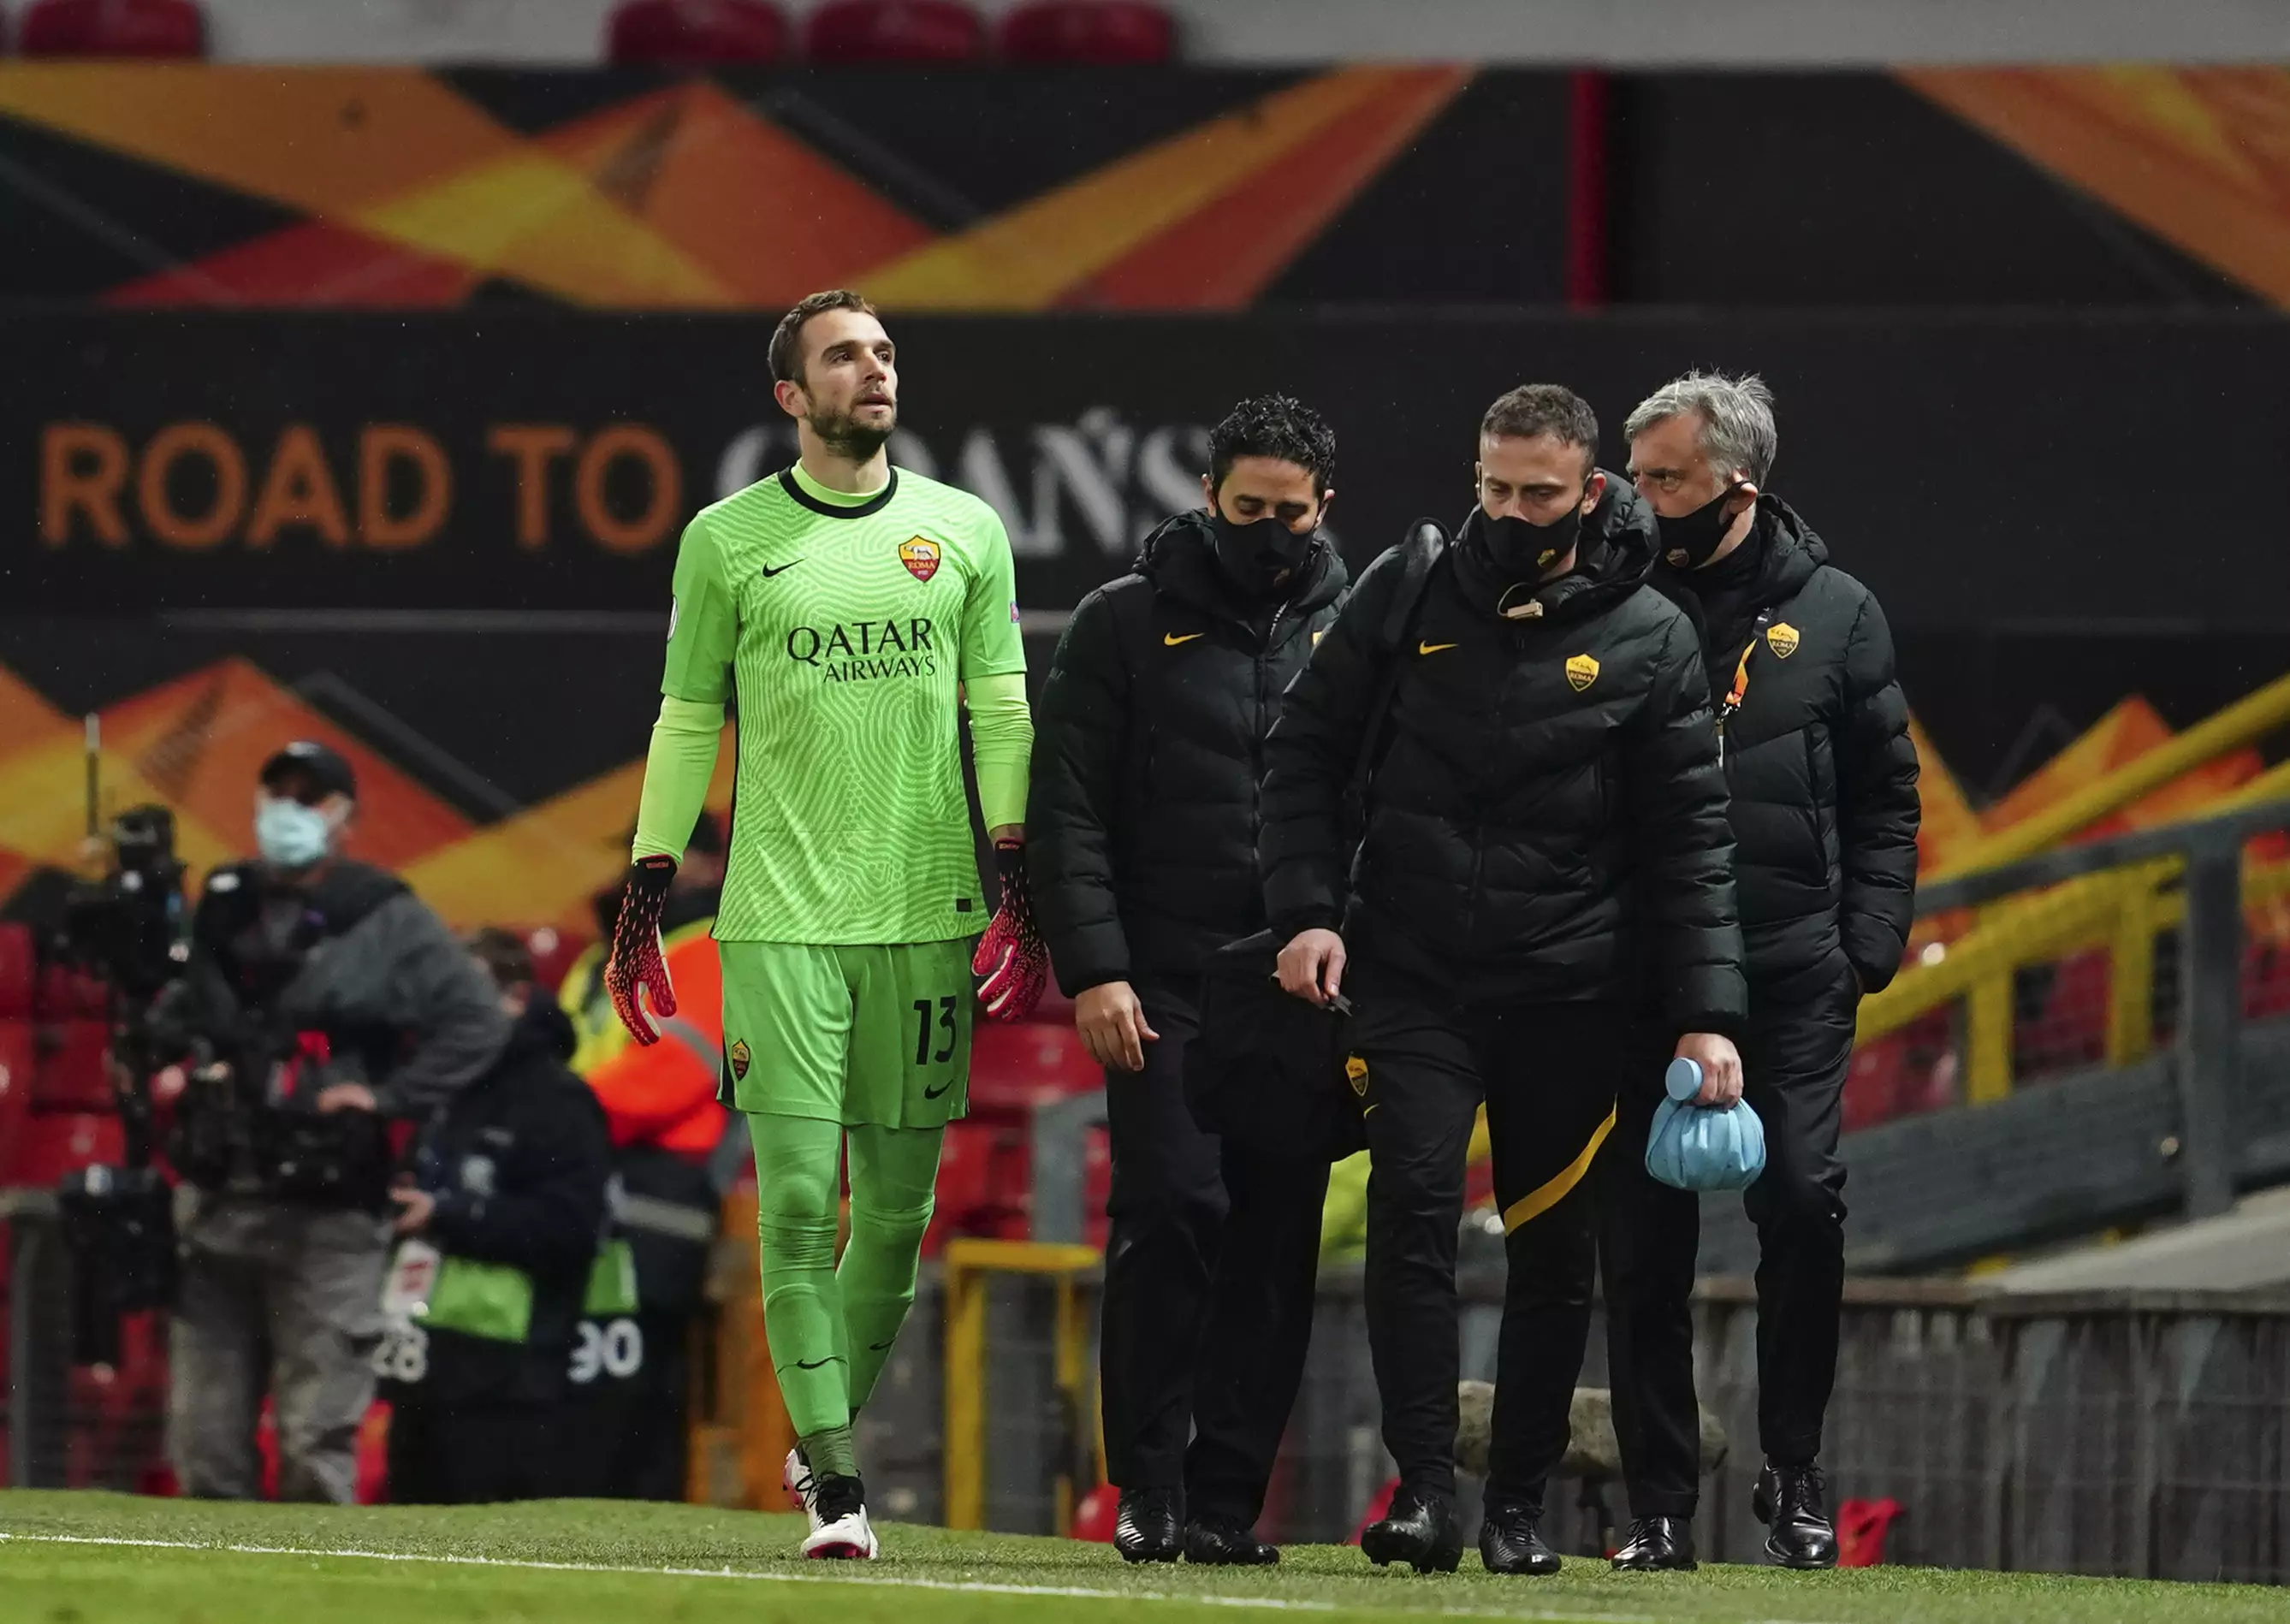 Pau Lopez was taken off in the first leg and will miss the remainder of the season